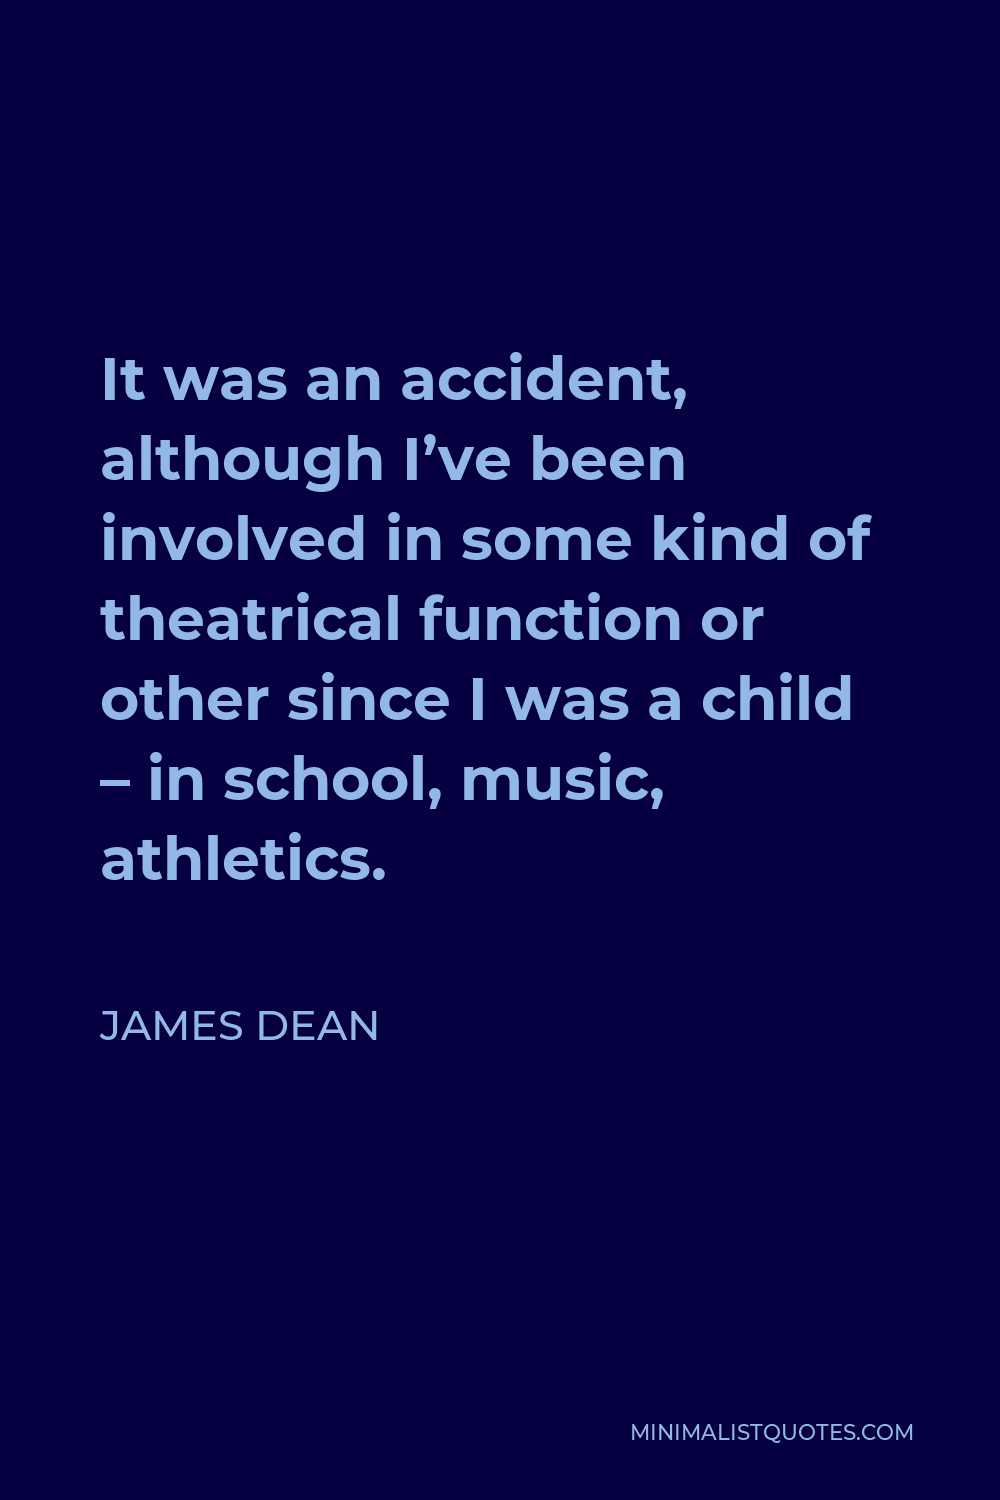 James Dean Quote - It was an accident, although I’ve been involved in some kind of theatrical function or other since I was a child – in school, music, athletics.